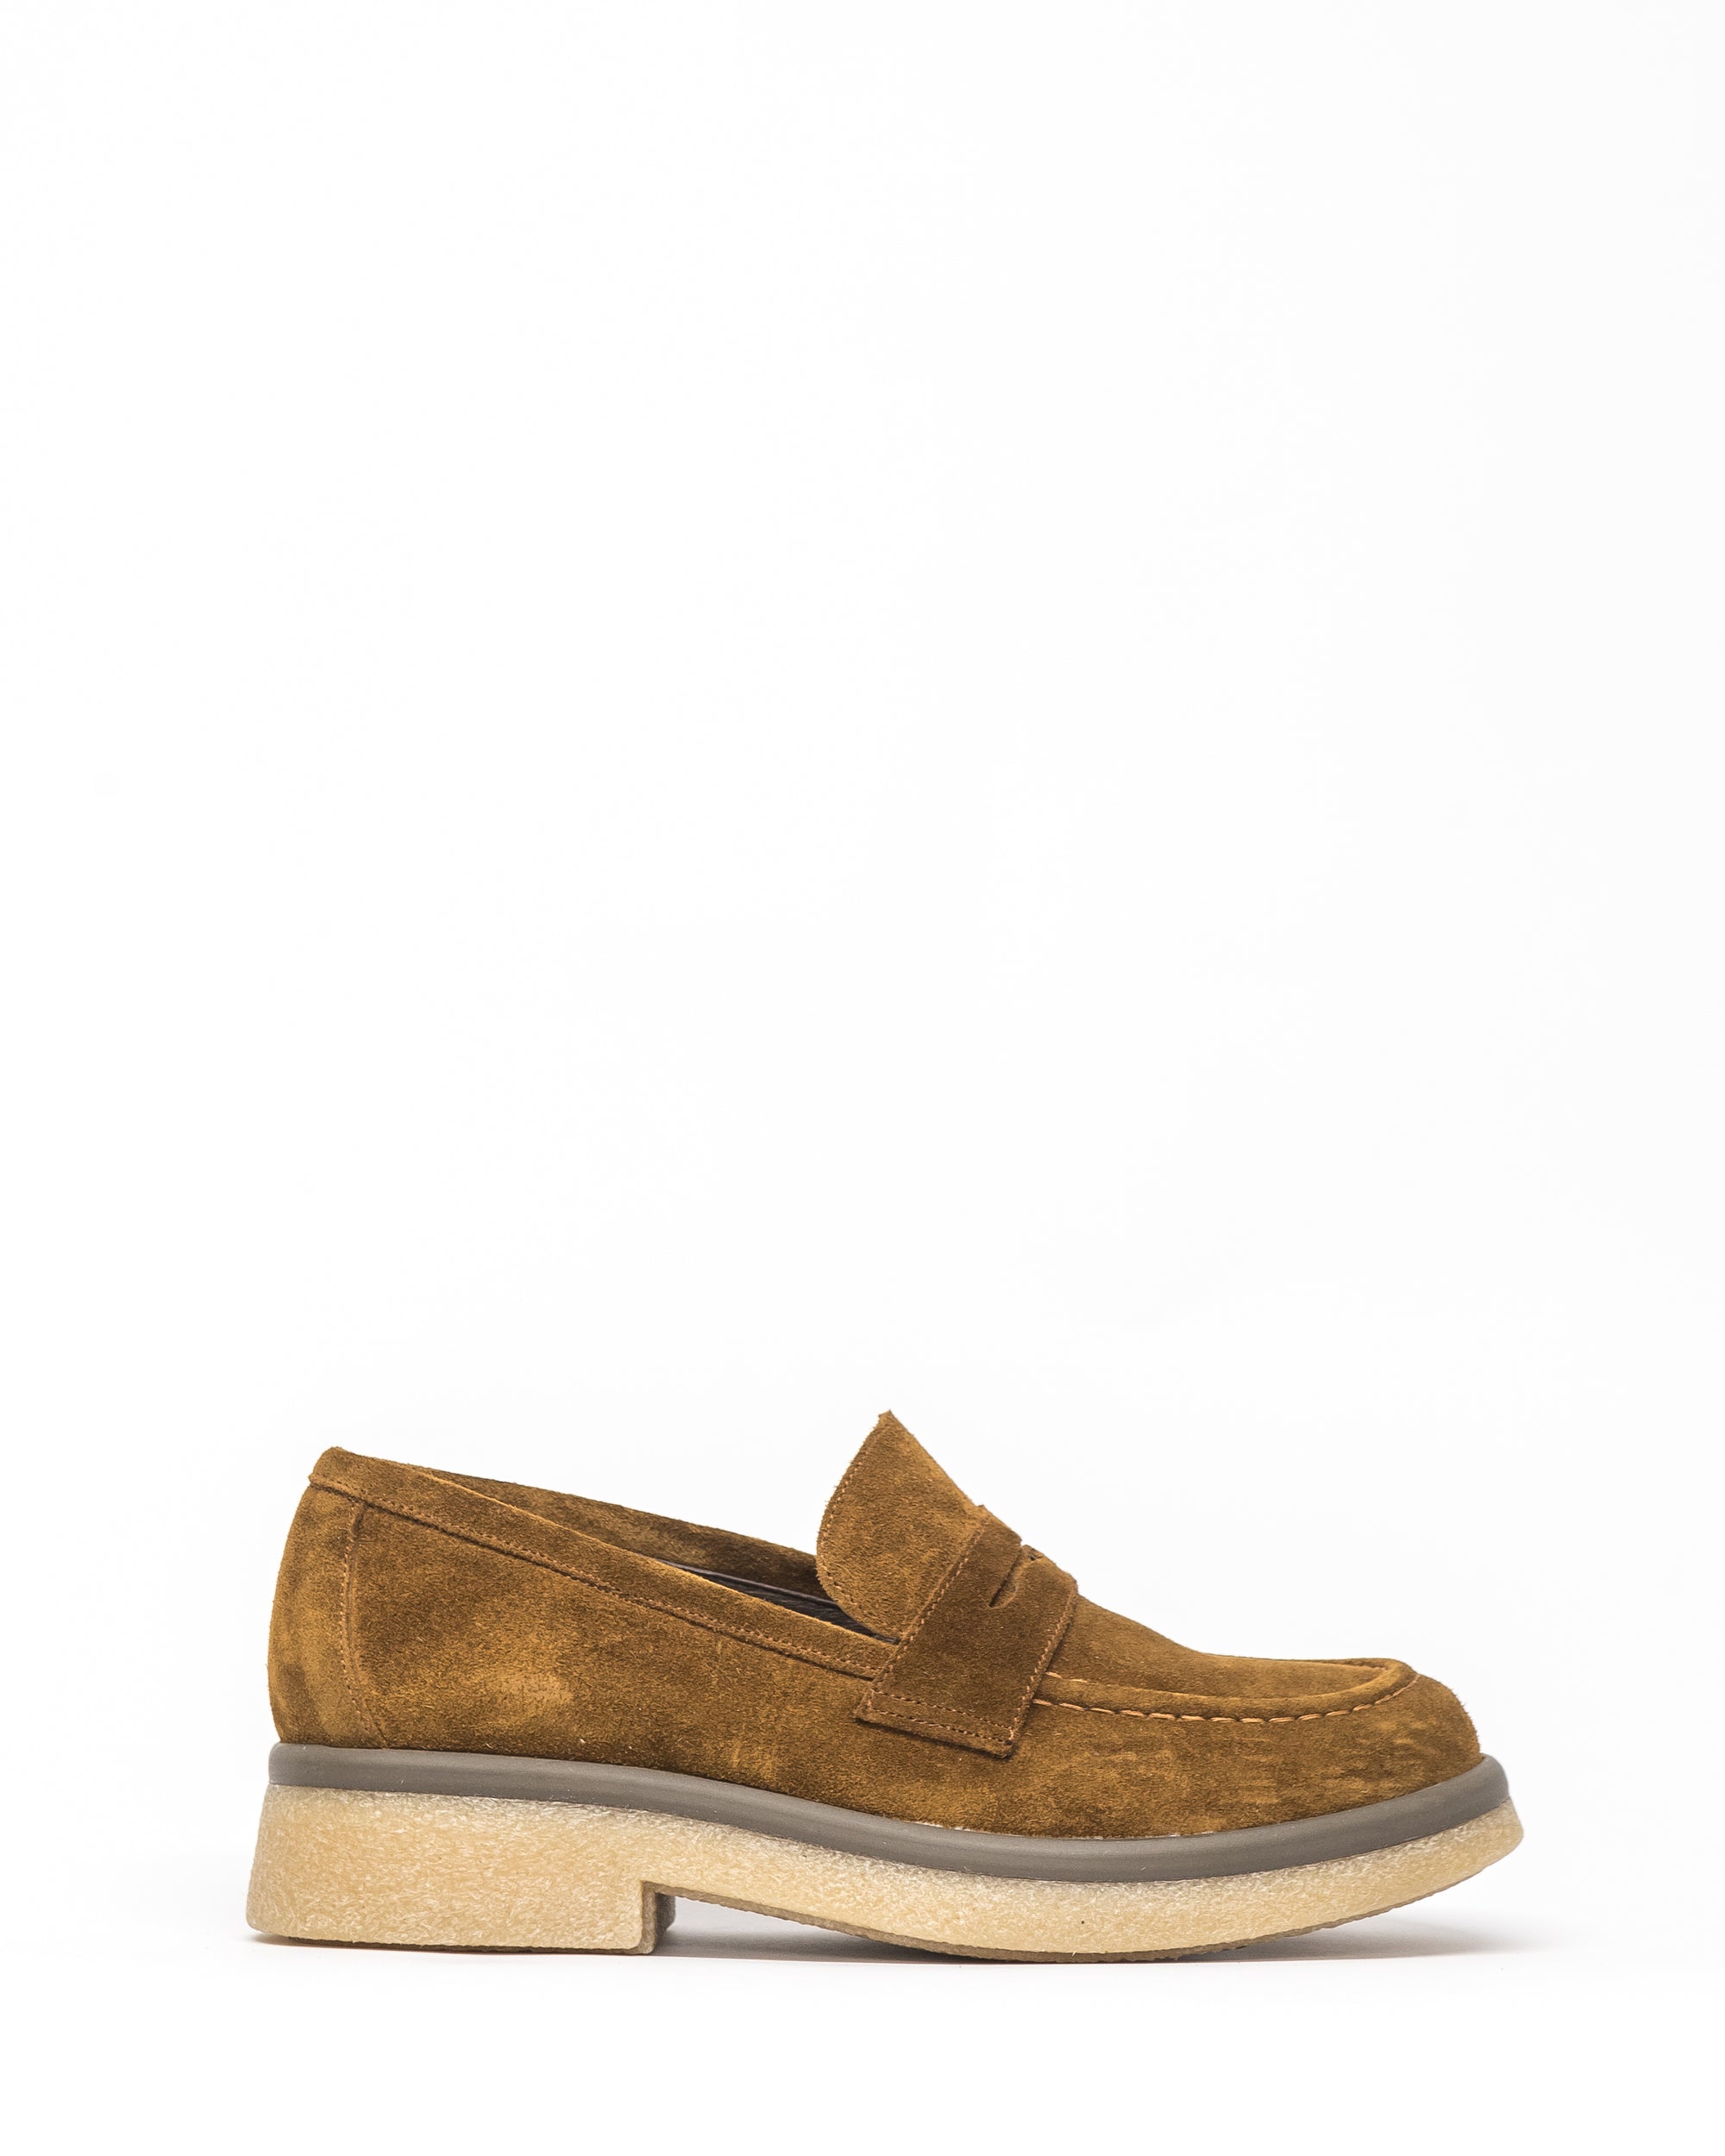 lotto loafer - brown suede